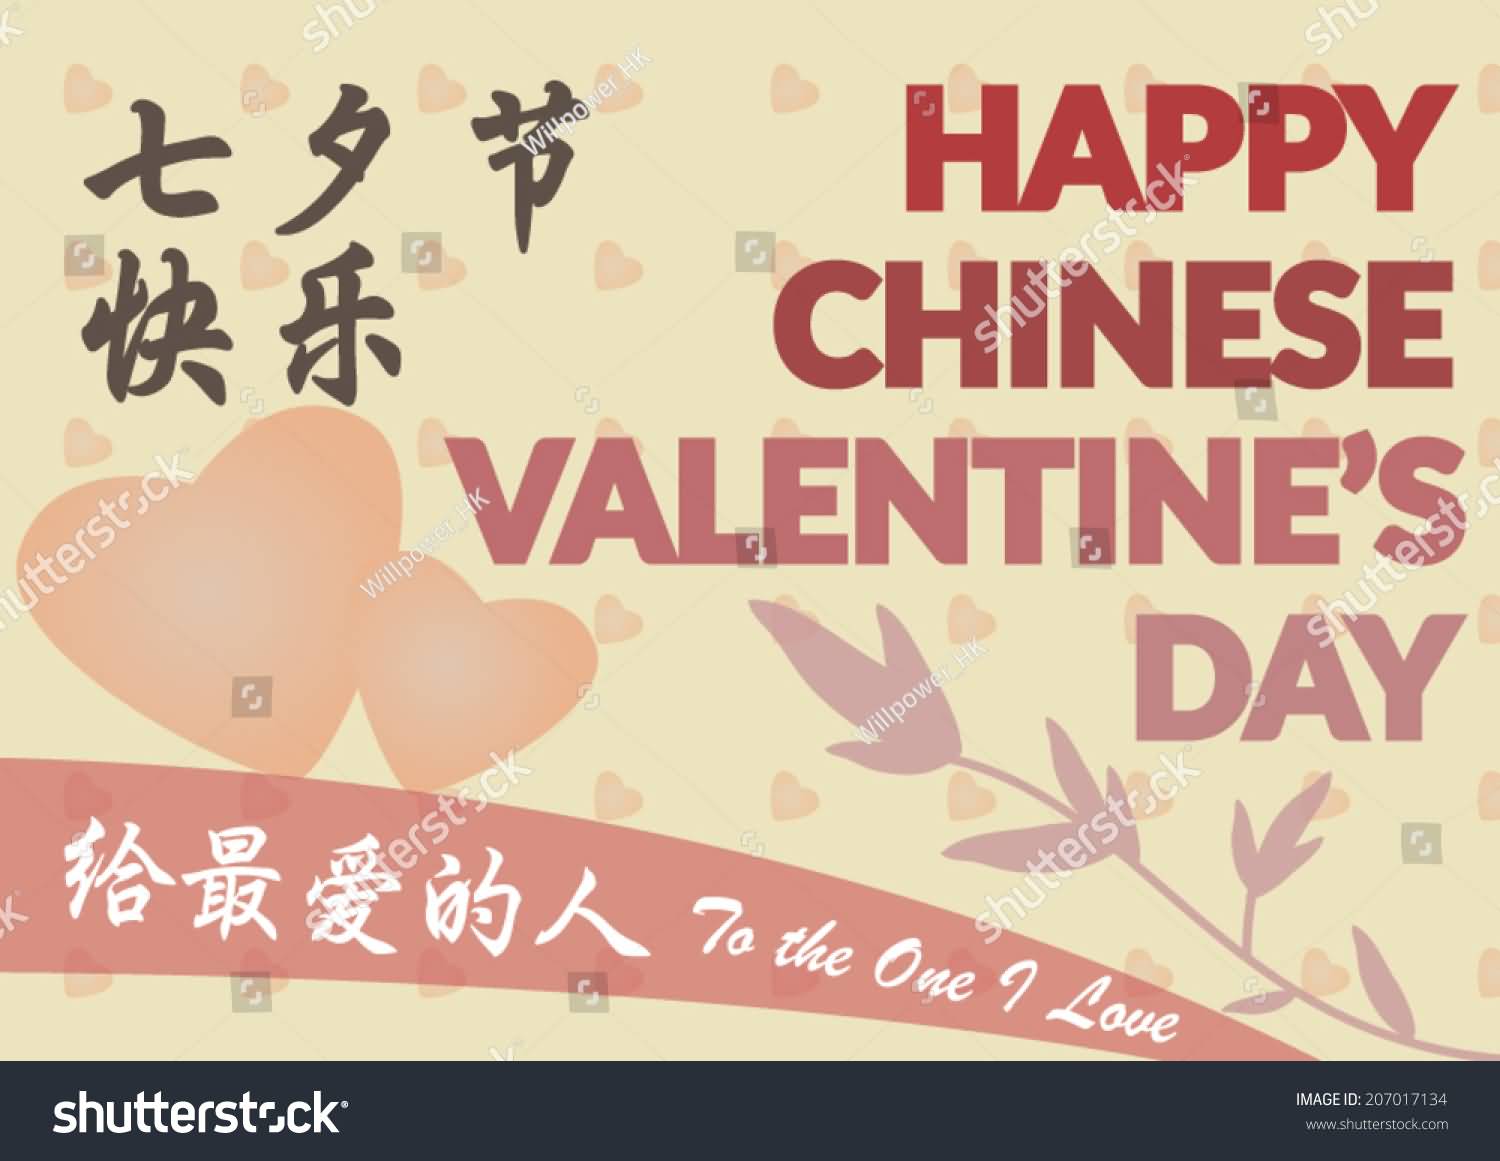 Happy Chinese Valentine's Day Illustration Picture